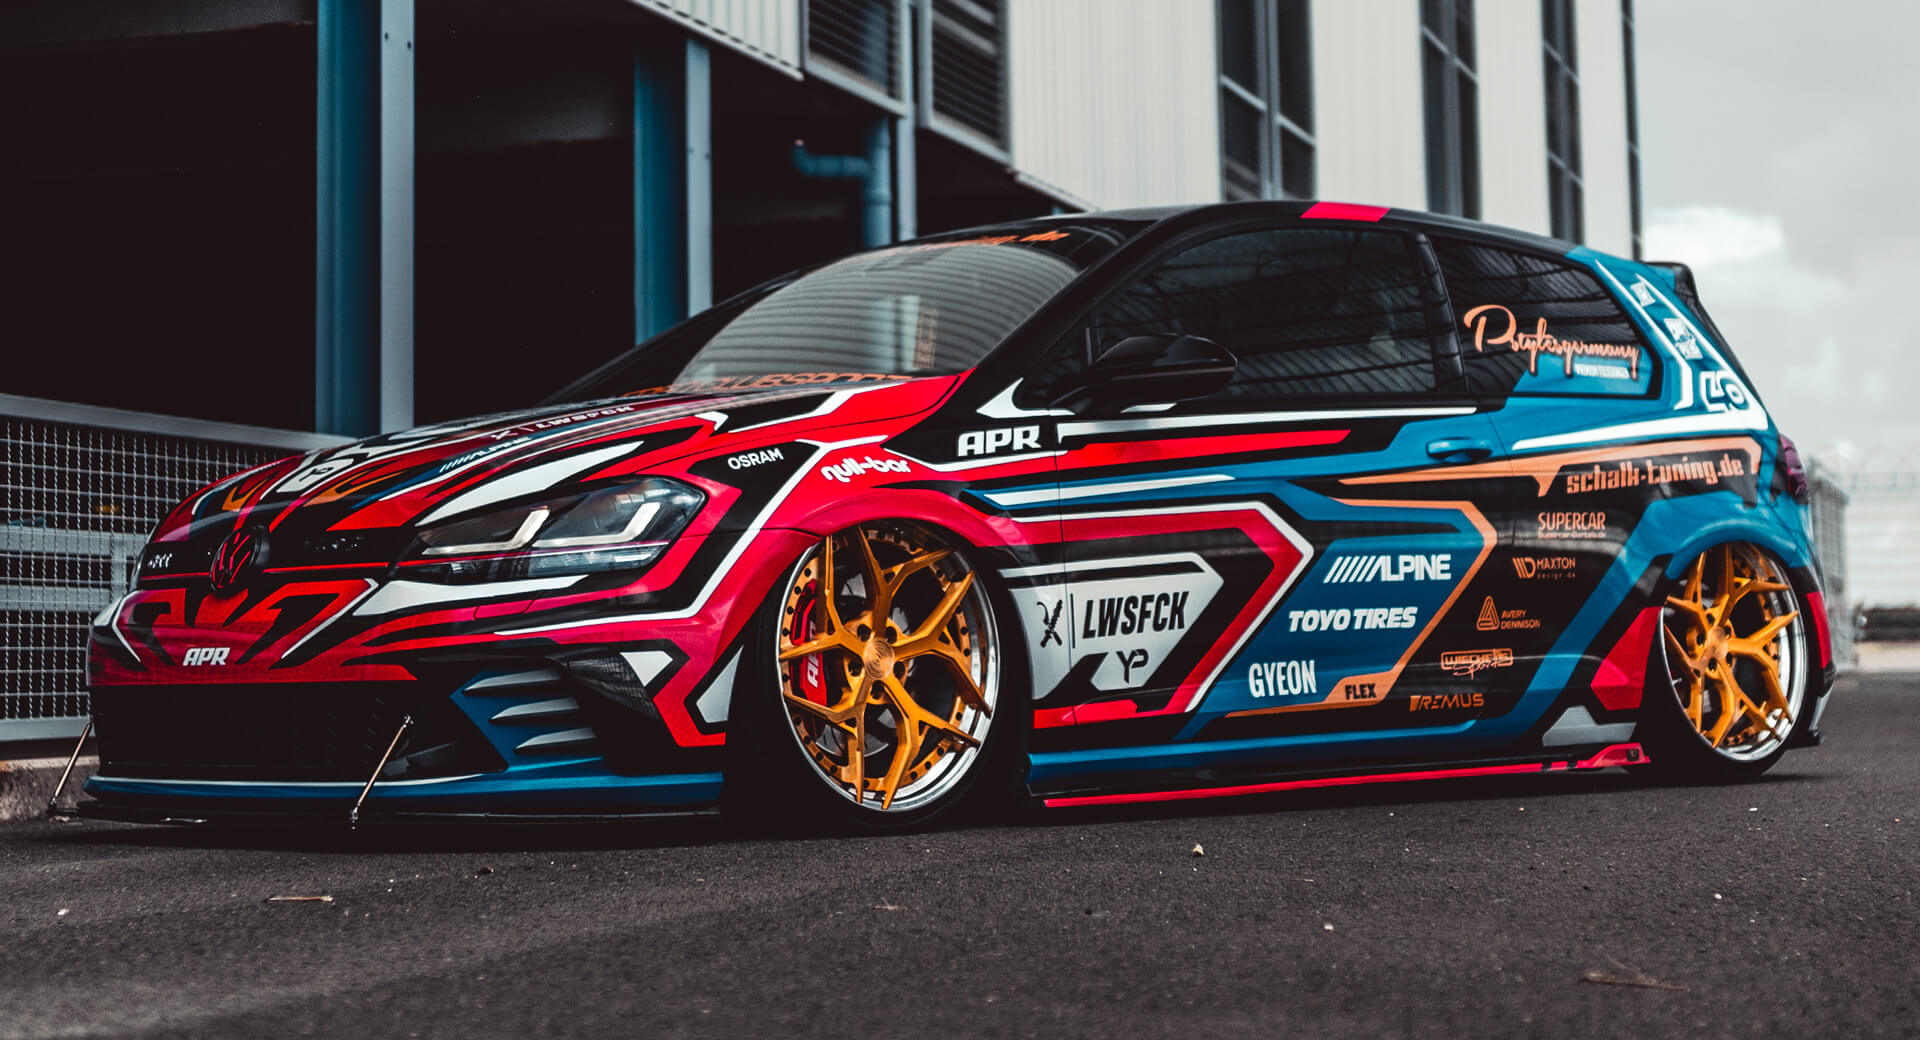 Golf GTI Clubsport Tuning Package Stage 2 Build – VUDU Performance